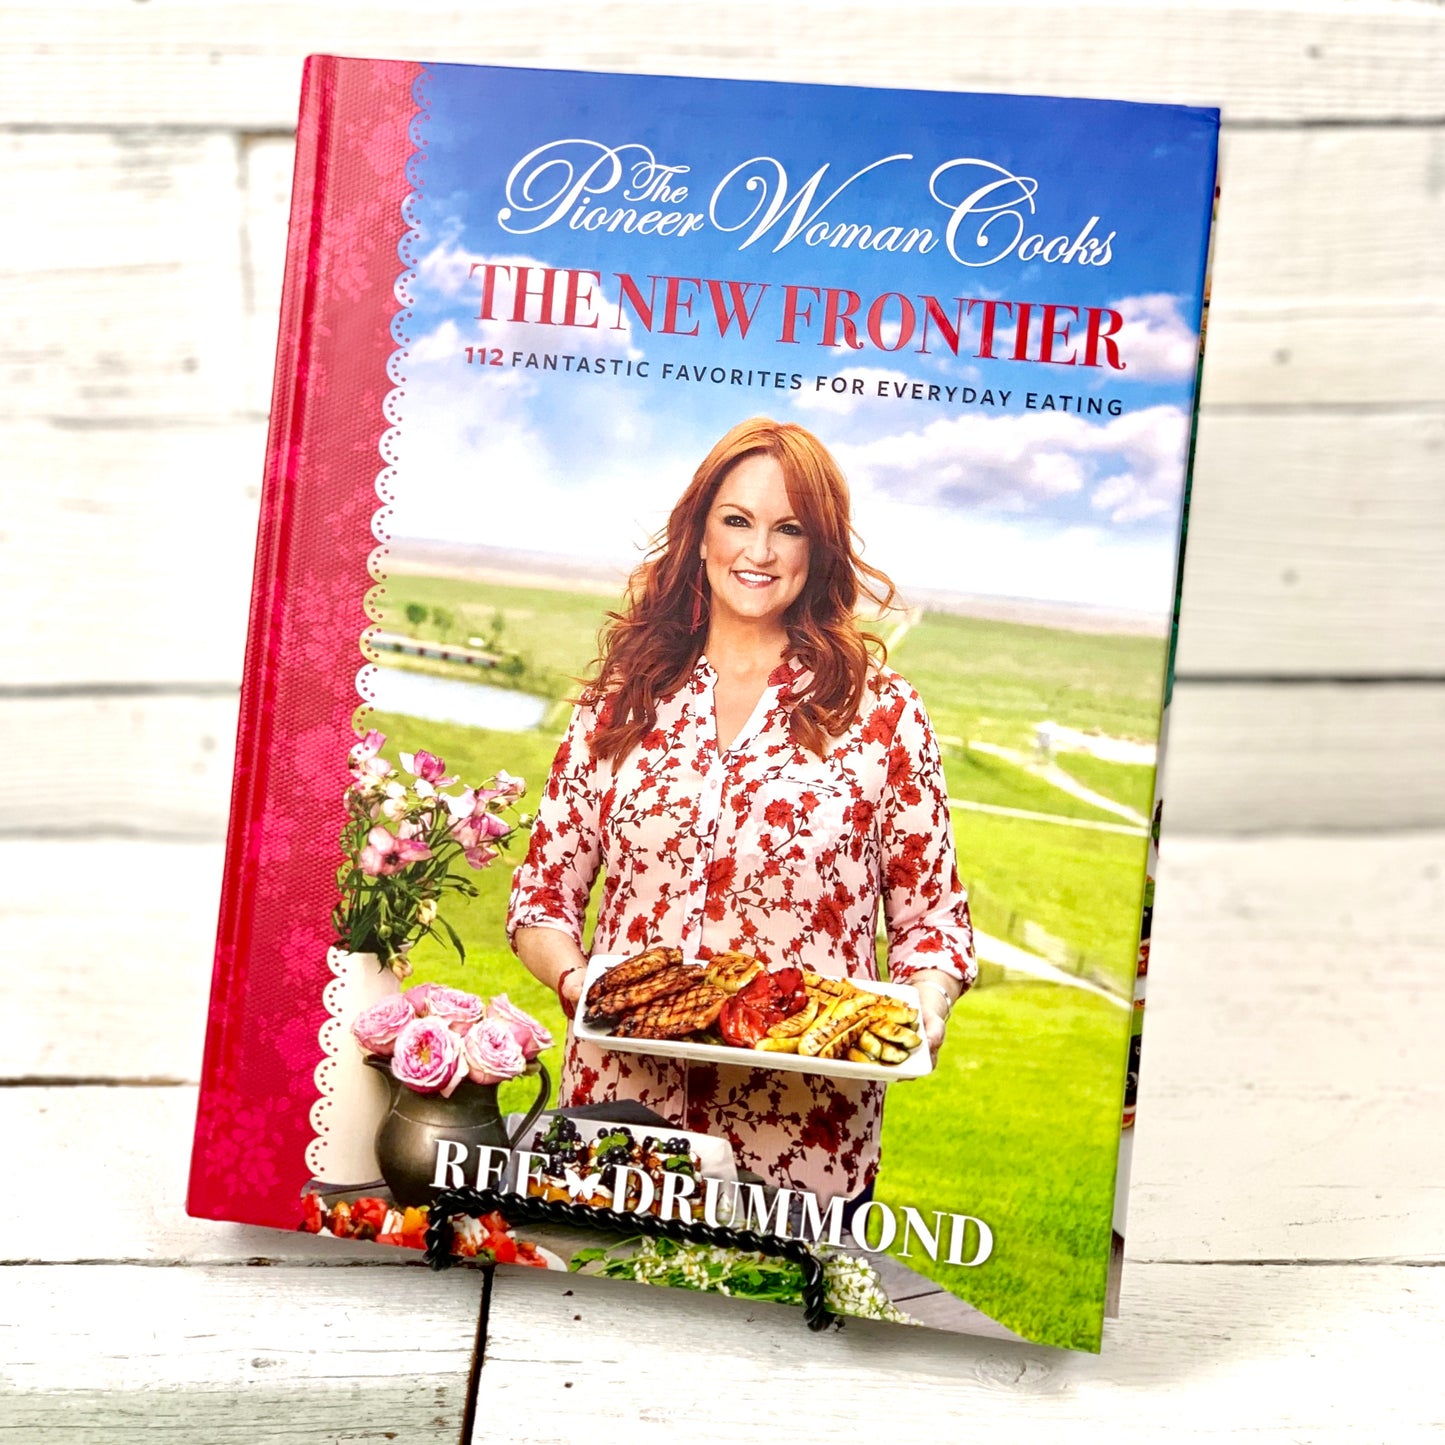 The Pioneer Woman Cooks "The New Frontier"